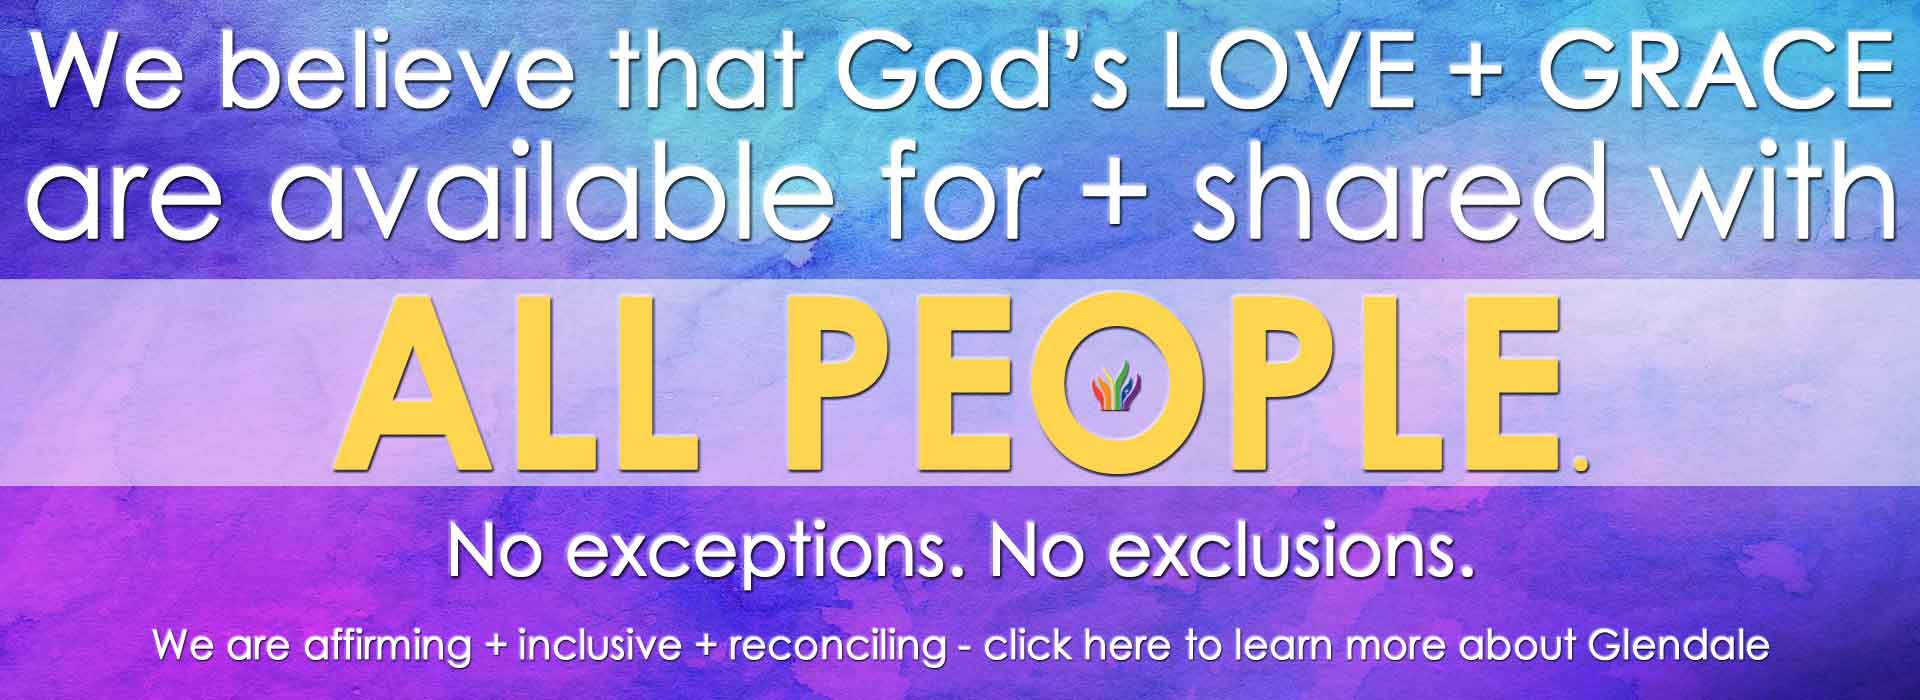 Gods Love and Grace are Available For and Share With ALL PEOPLE. - Glendale United Methodist Church Nashville TN UMC